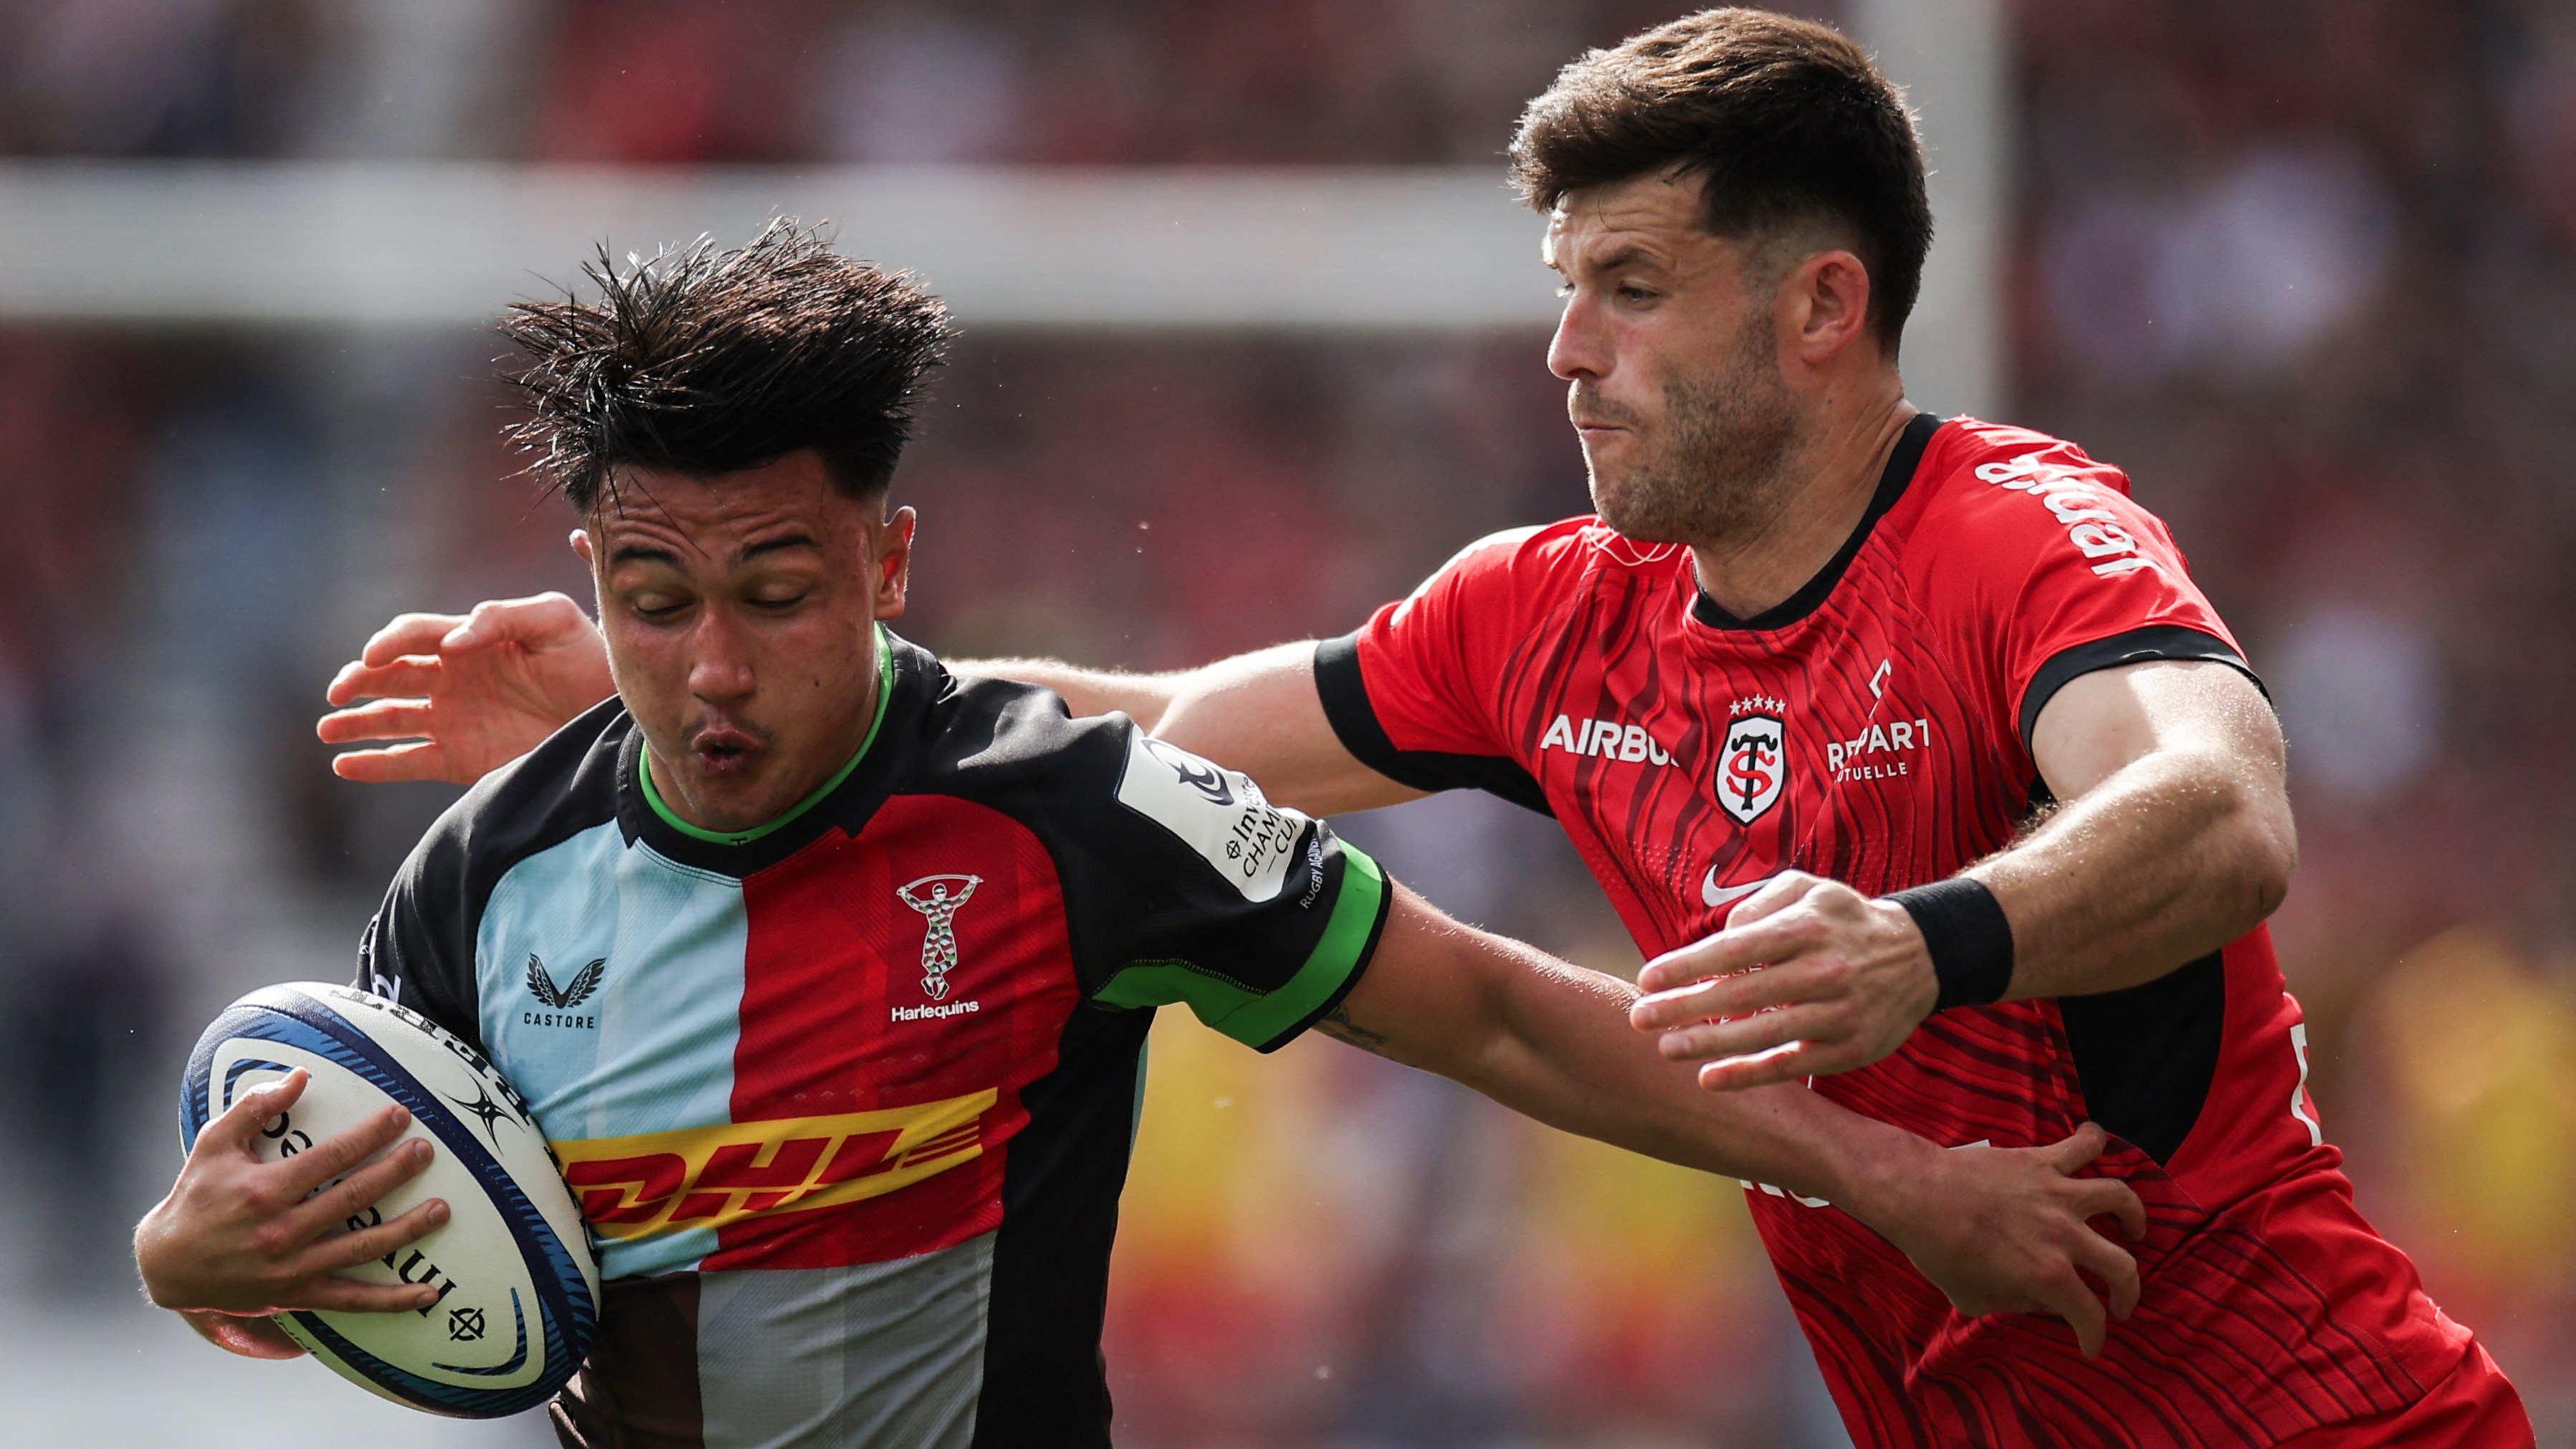 Smith faced boos in the home stadium but played superbly as Quins rallied in the second half